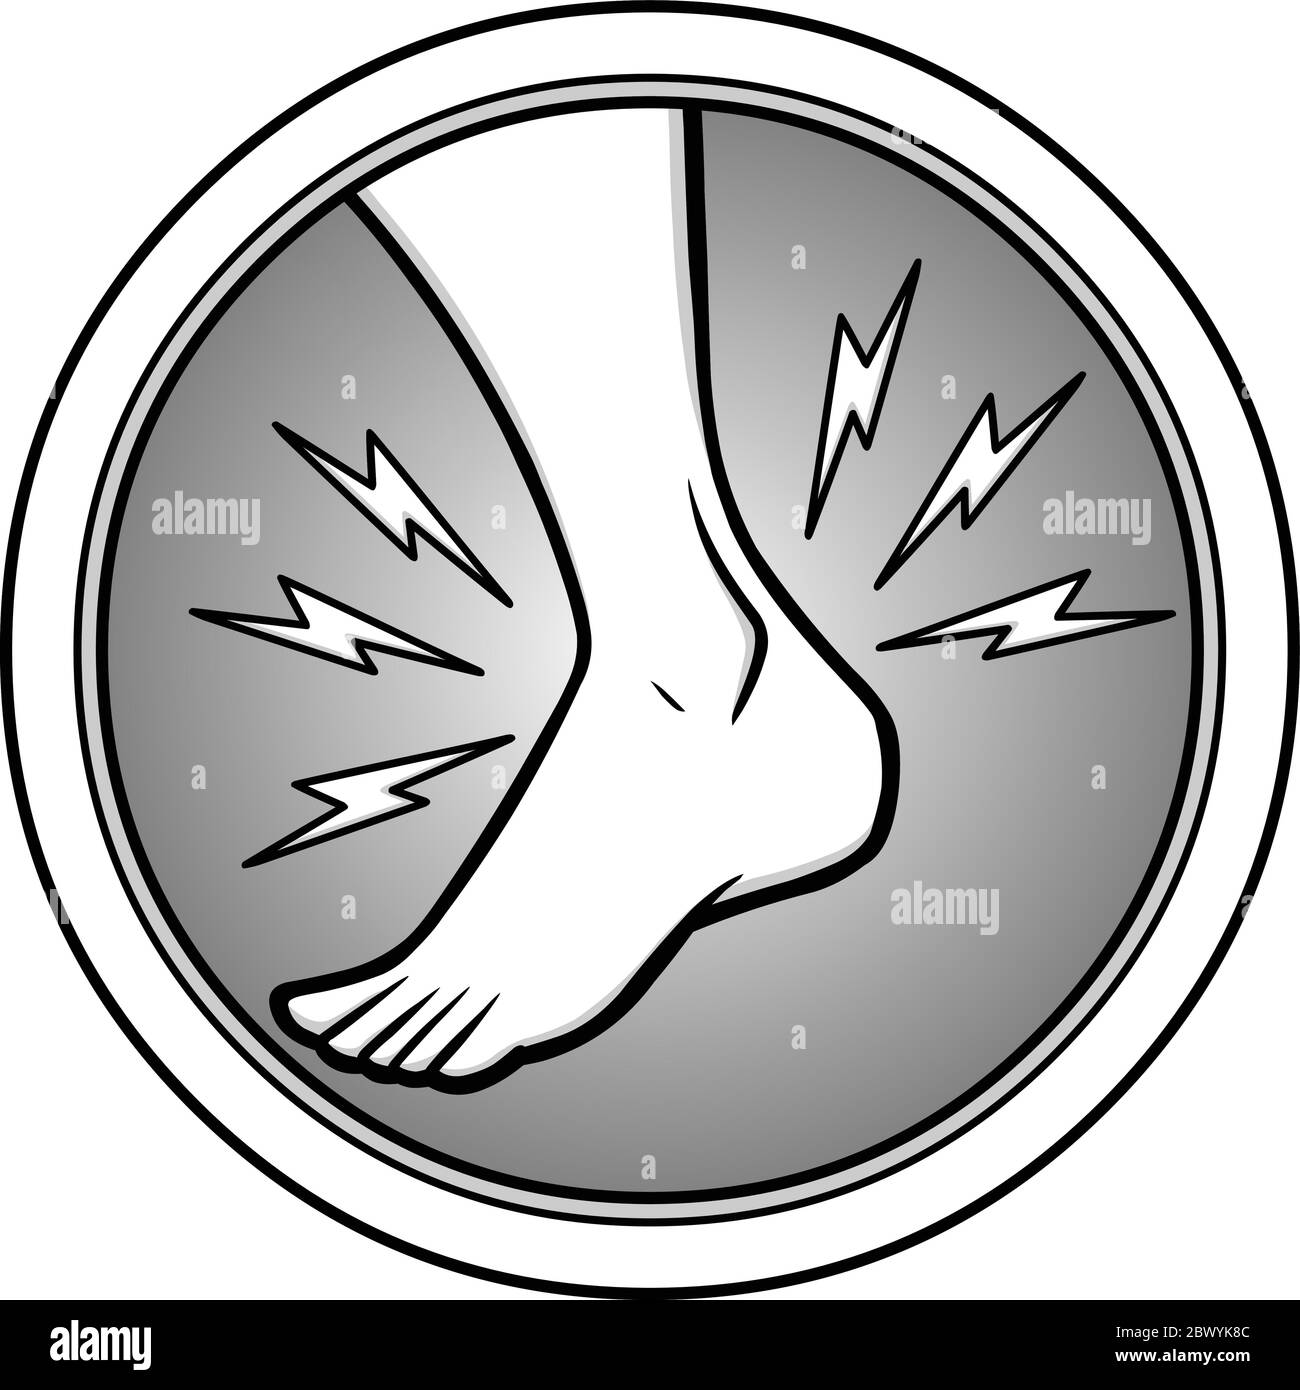 Ankle Injury Illustration- An Illustration of an Ankle Injury. Stock Vector